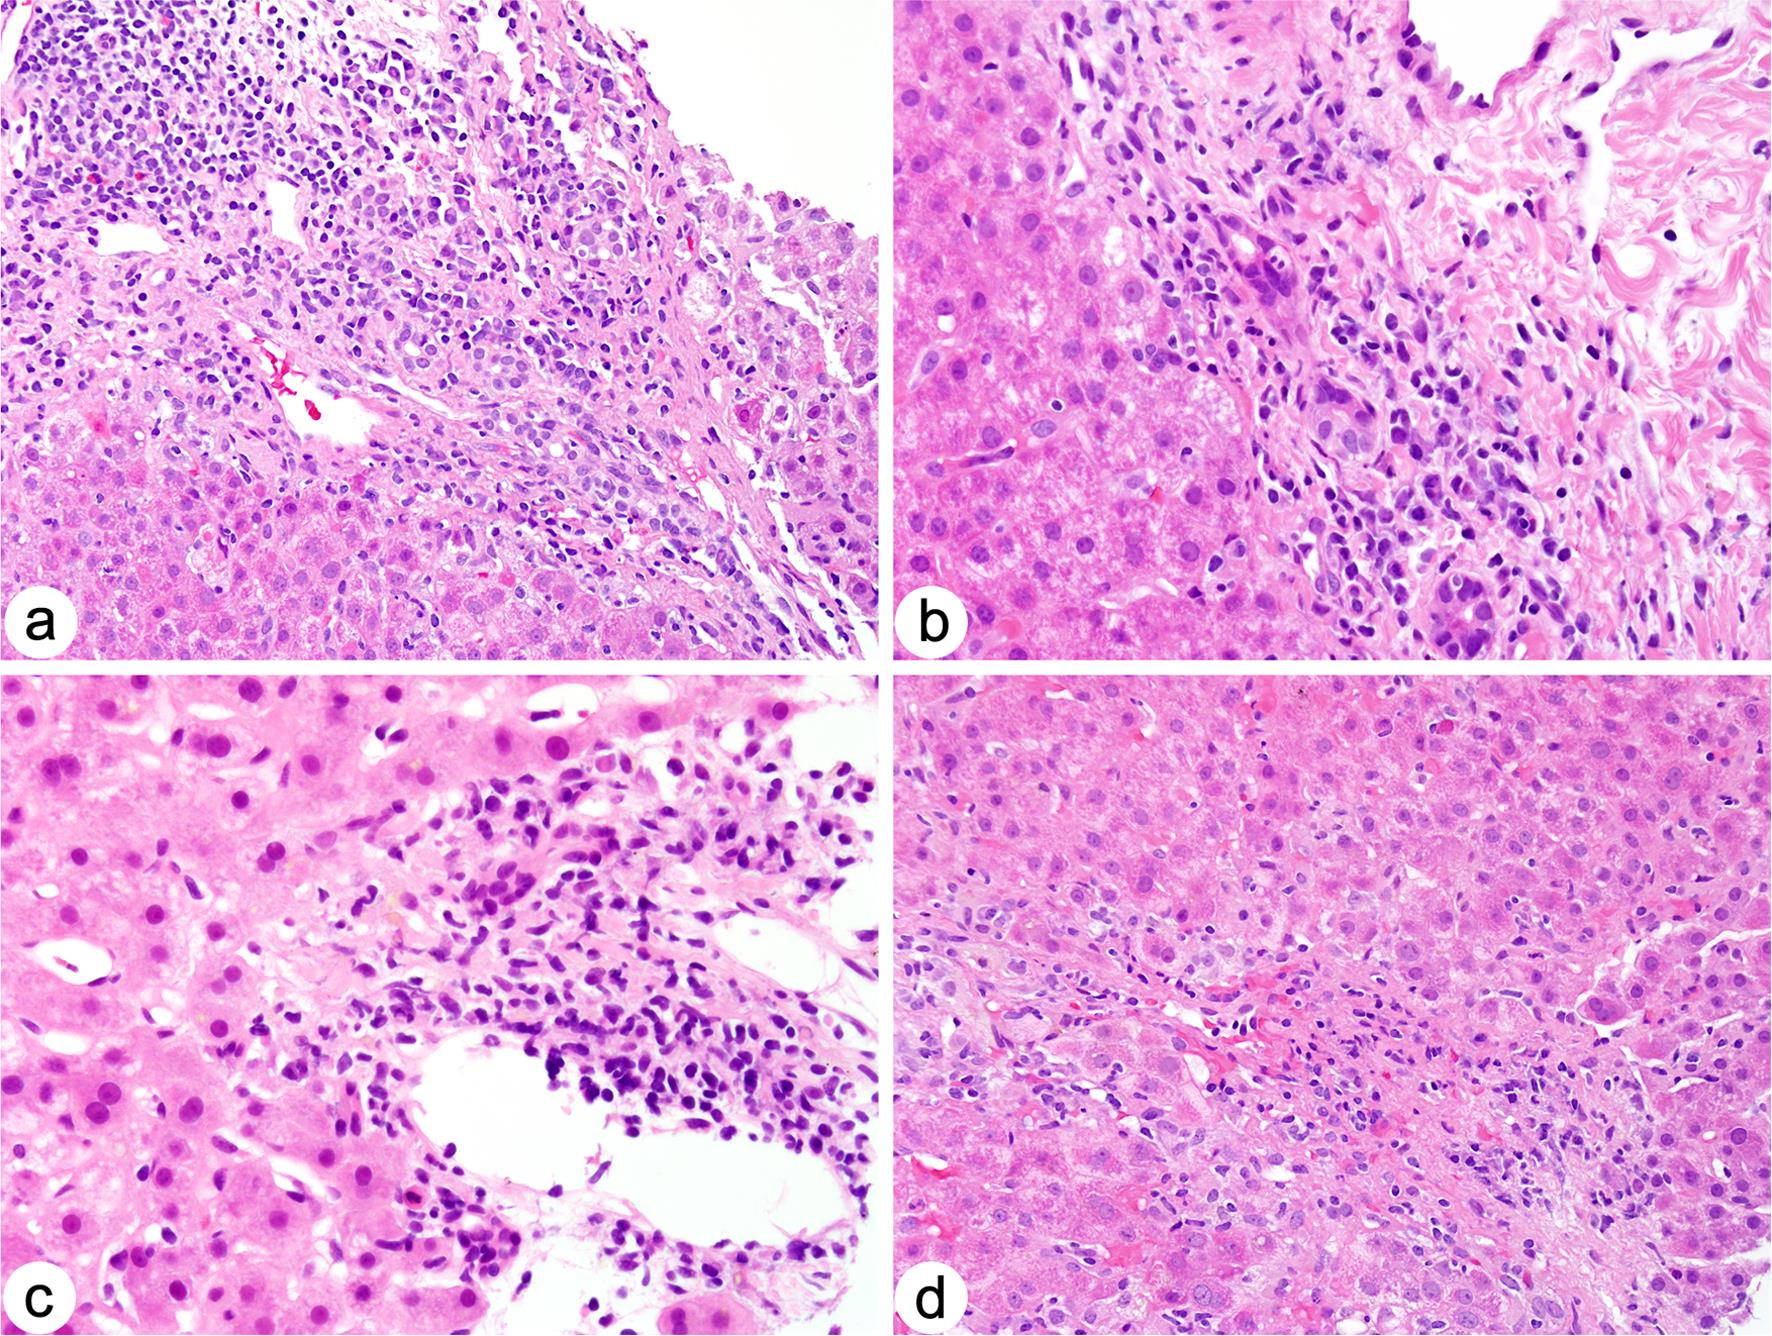 Plasma cell-rich rejection in liver allograft biopsies.